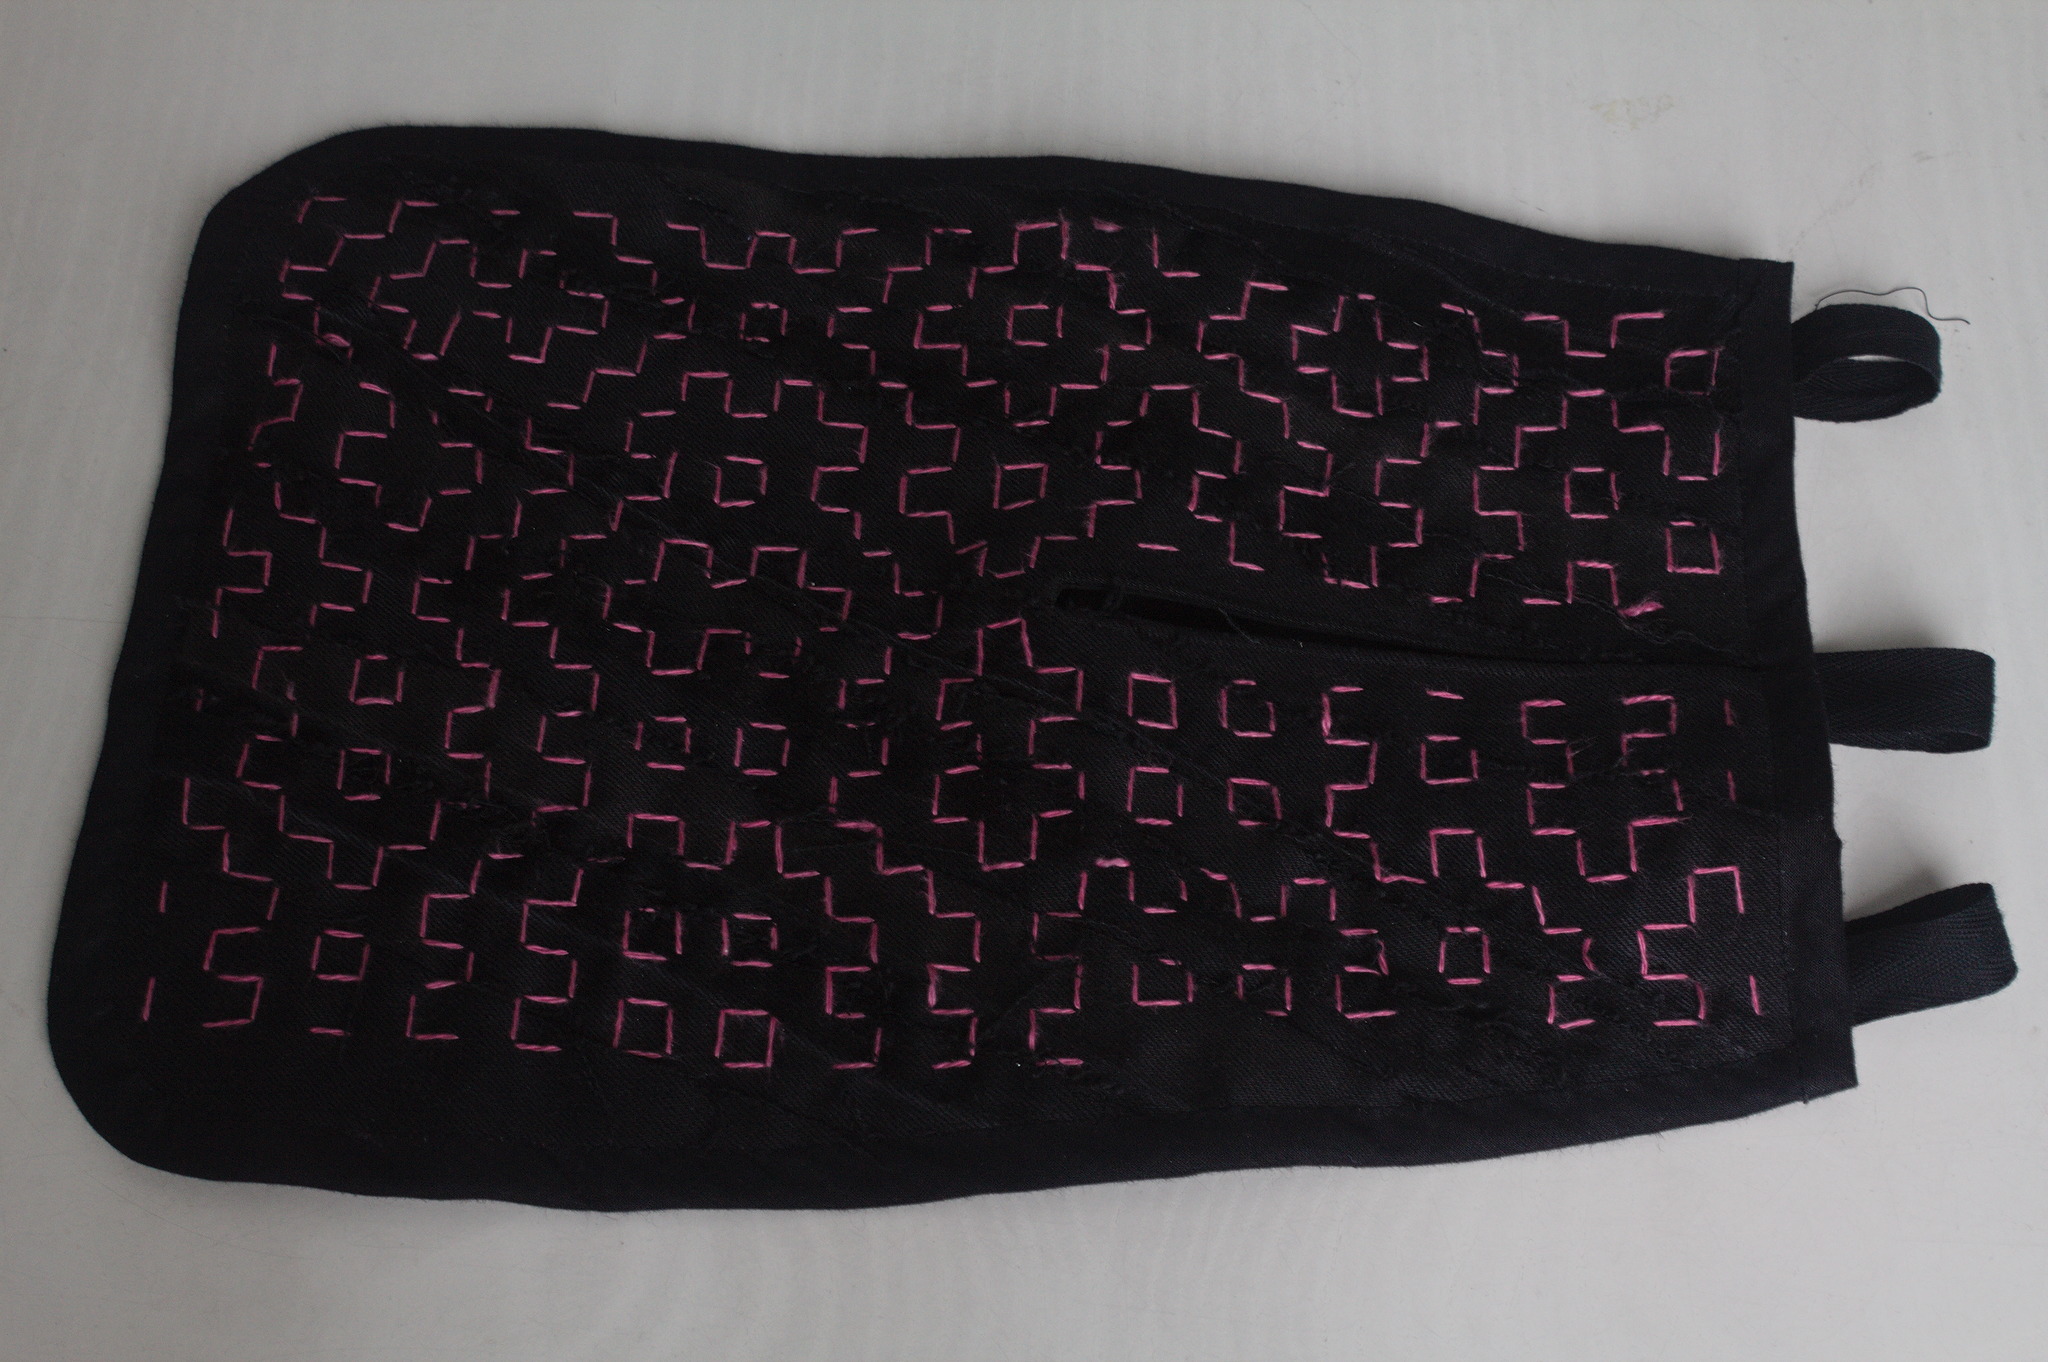 A 18th century pocket in black jeans with a random pattern of pink running stitches forming squares and other shapes. The unfinished edges of the pieces of jeans can be seen, running more or less diagonally.